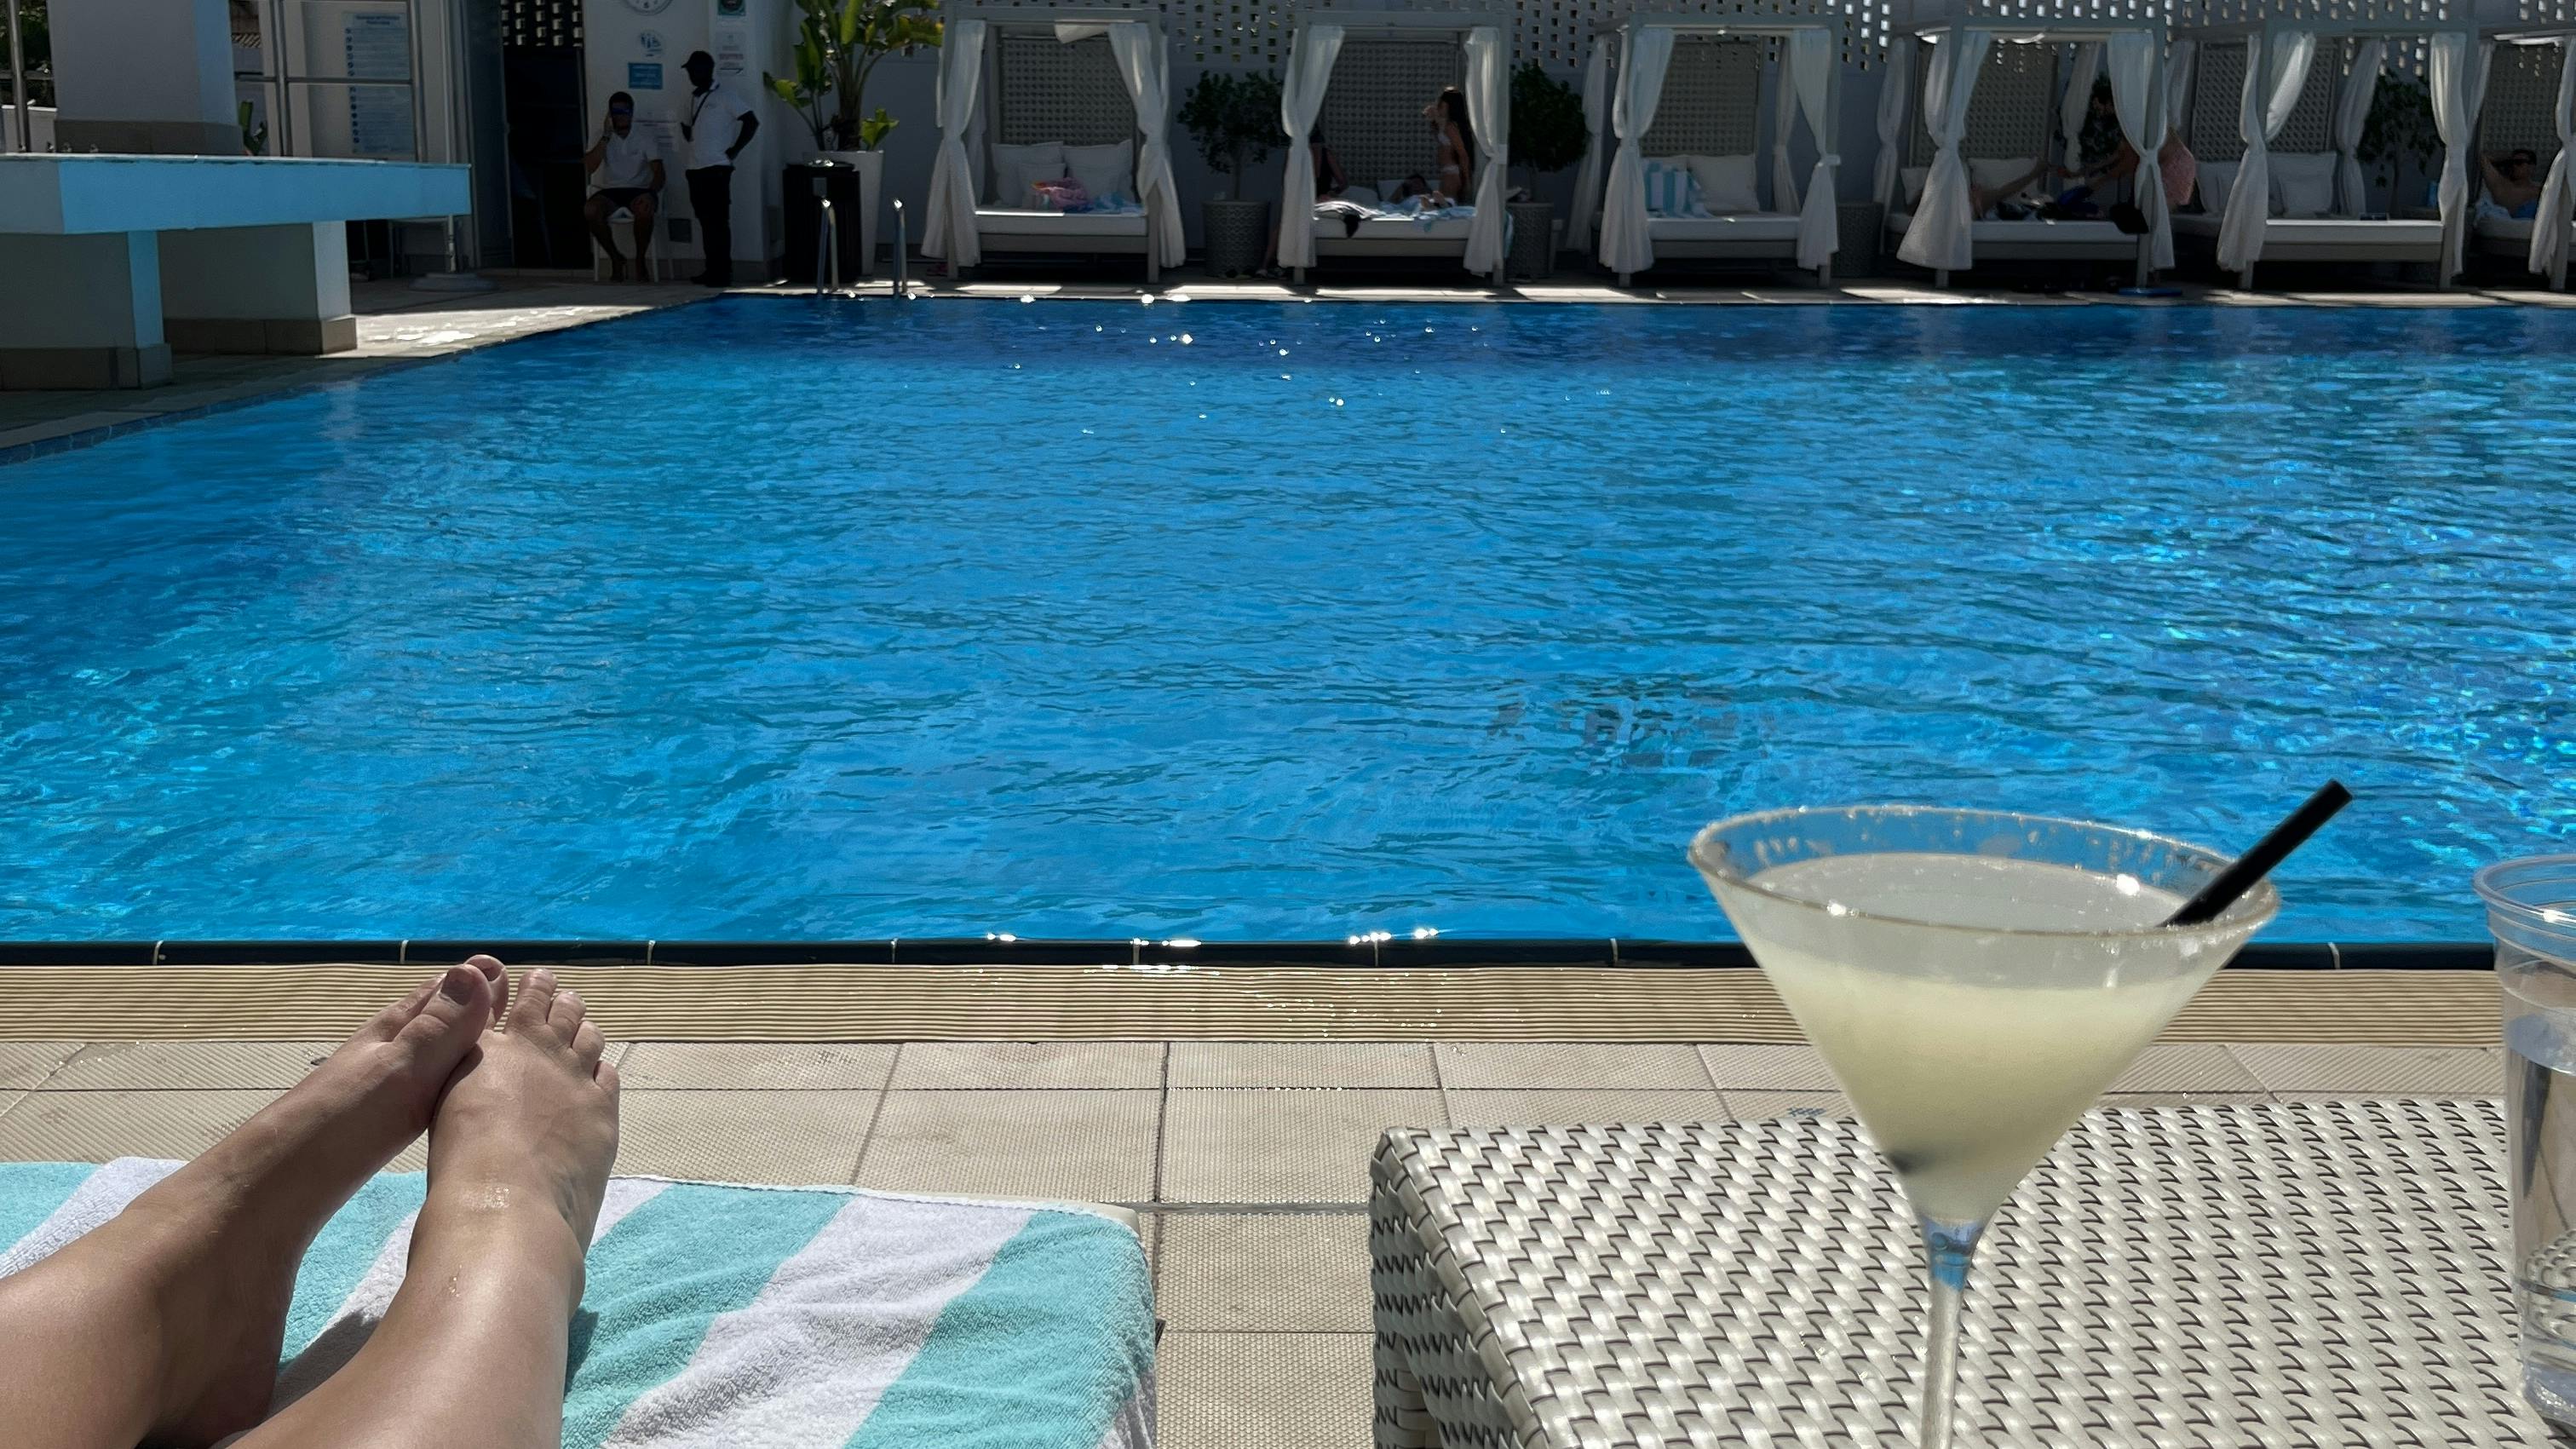 My POV: Laying by the pool in the sunshine with a cocktail next to me